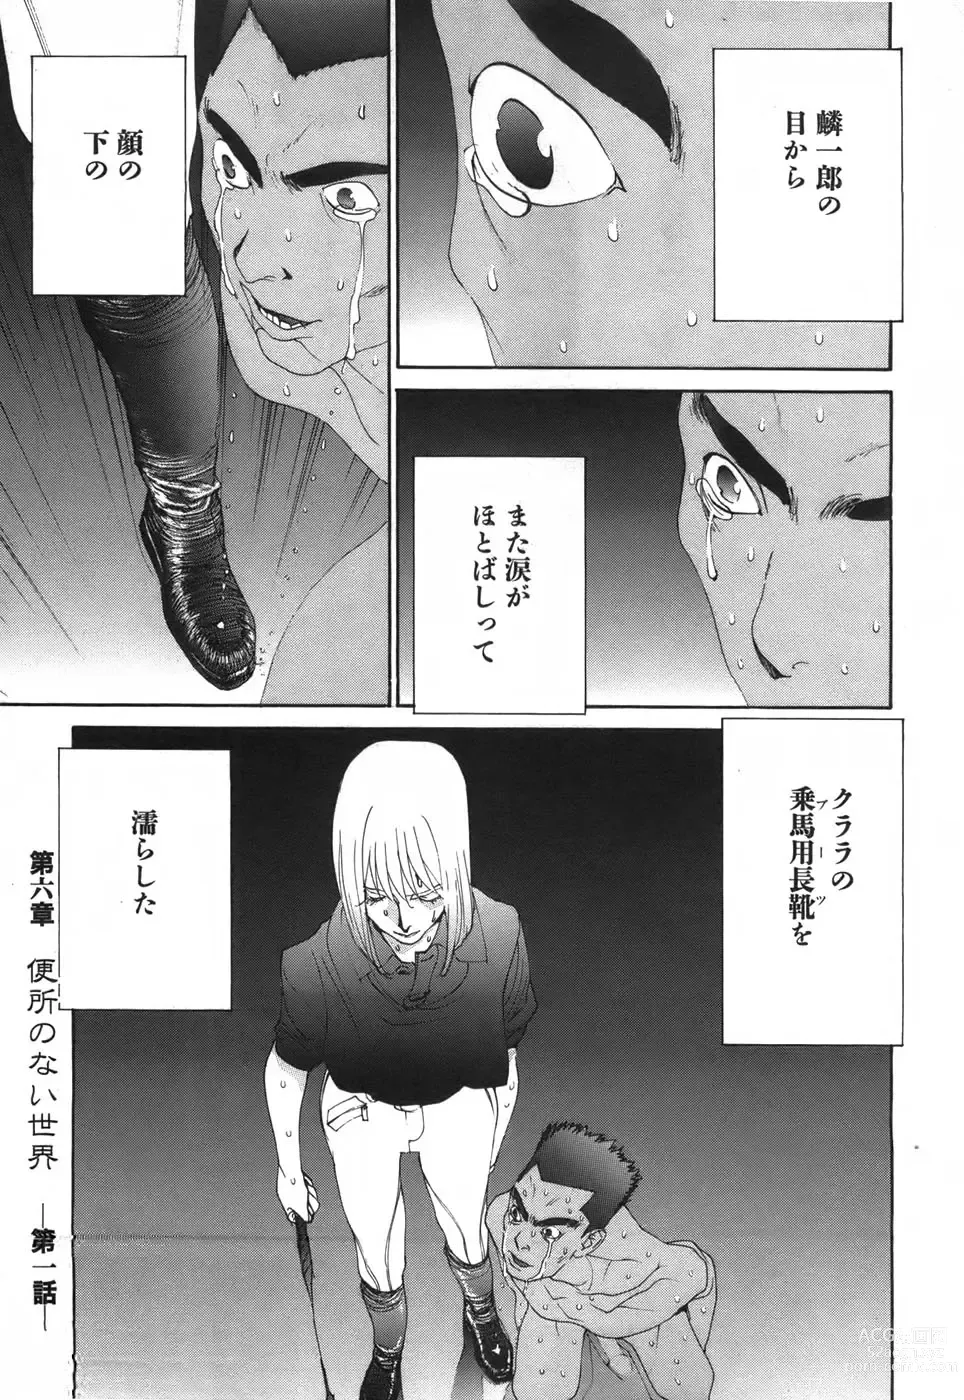 Page 7 of doujinshi Yapoo the human cattle vol.03